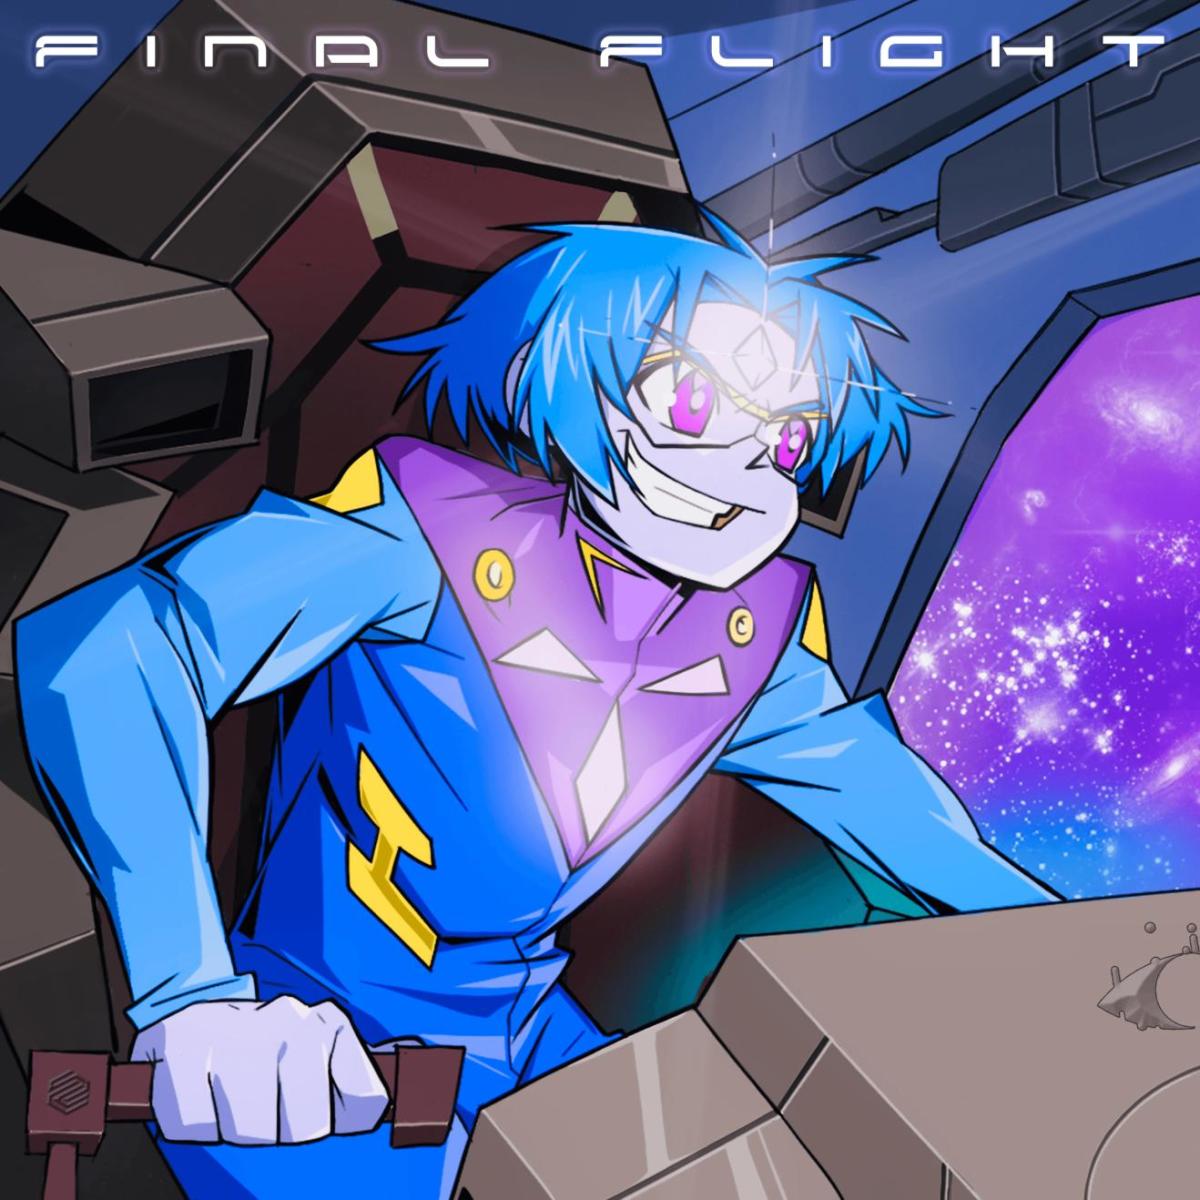 synth-single-review-final-flight-by-aeronexus